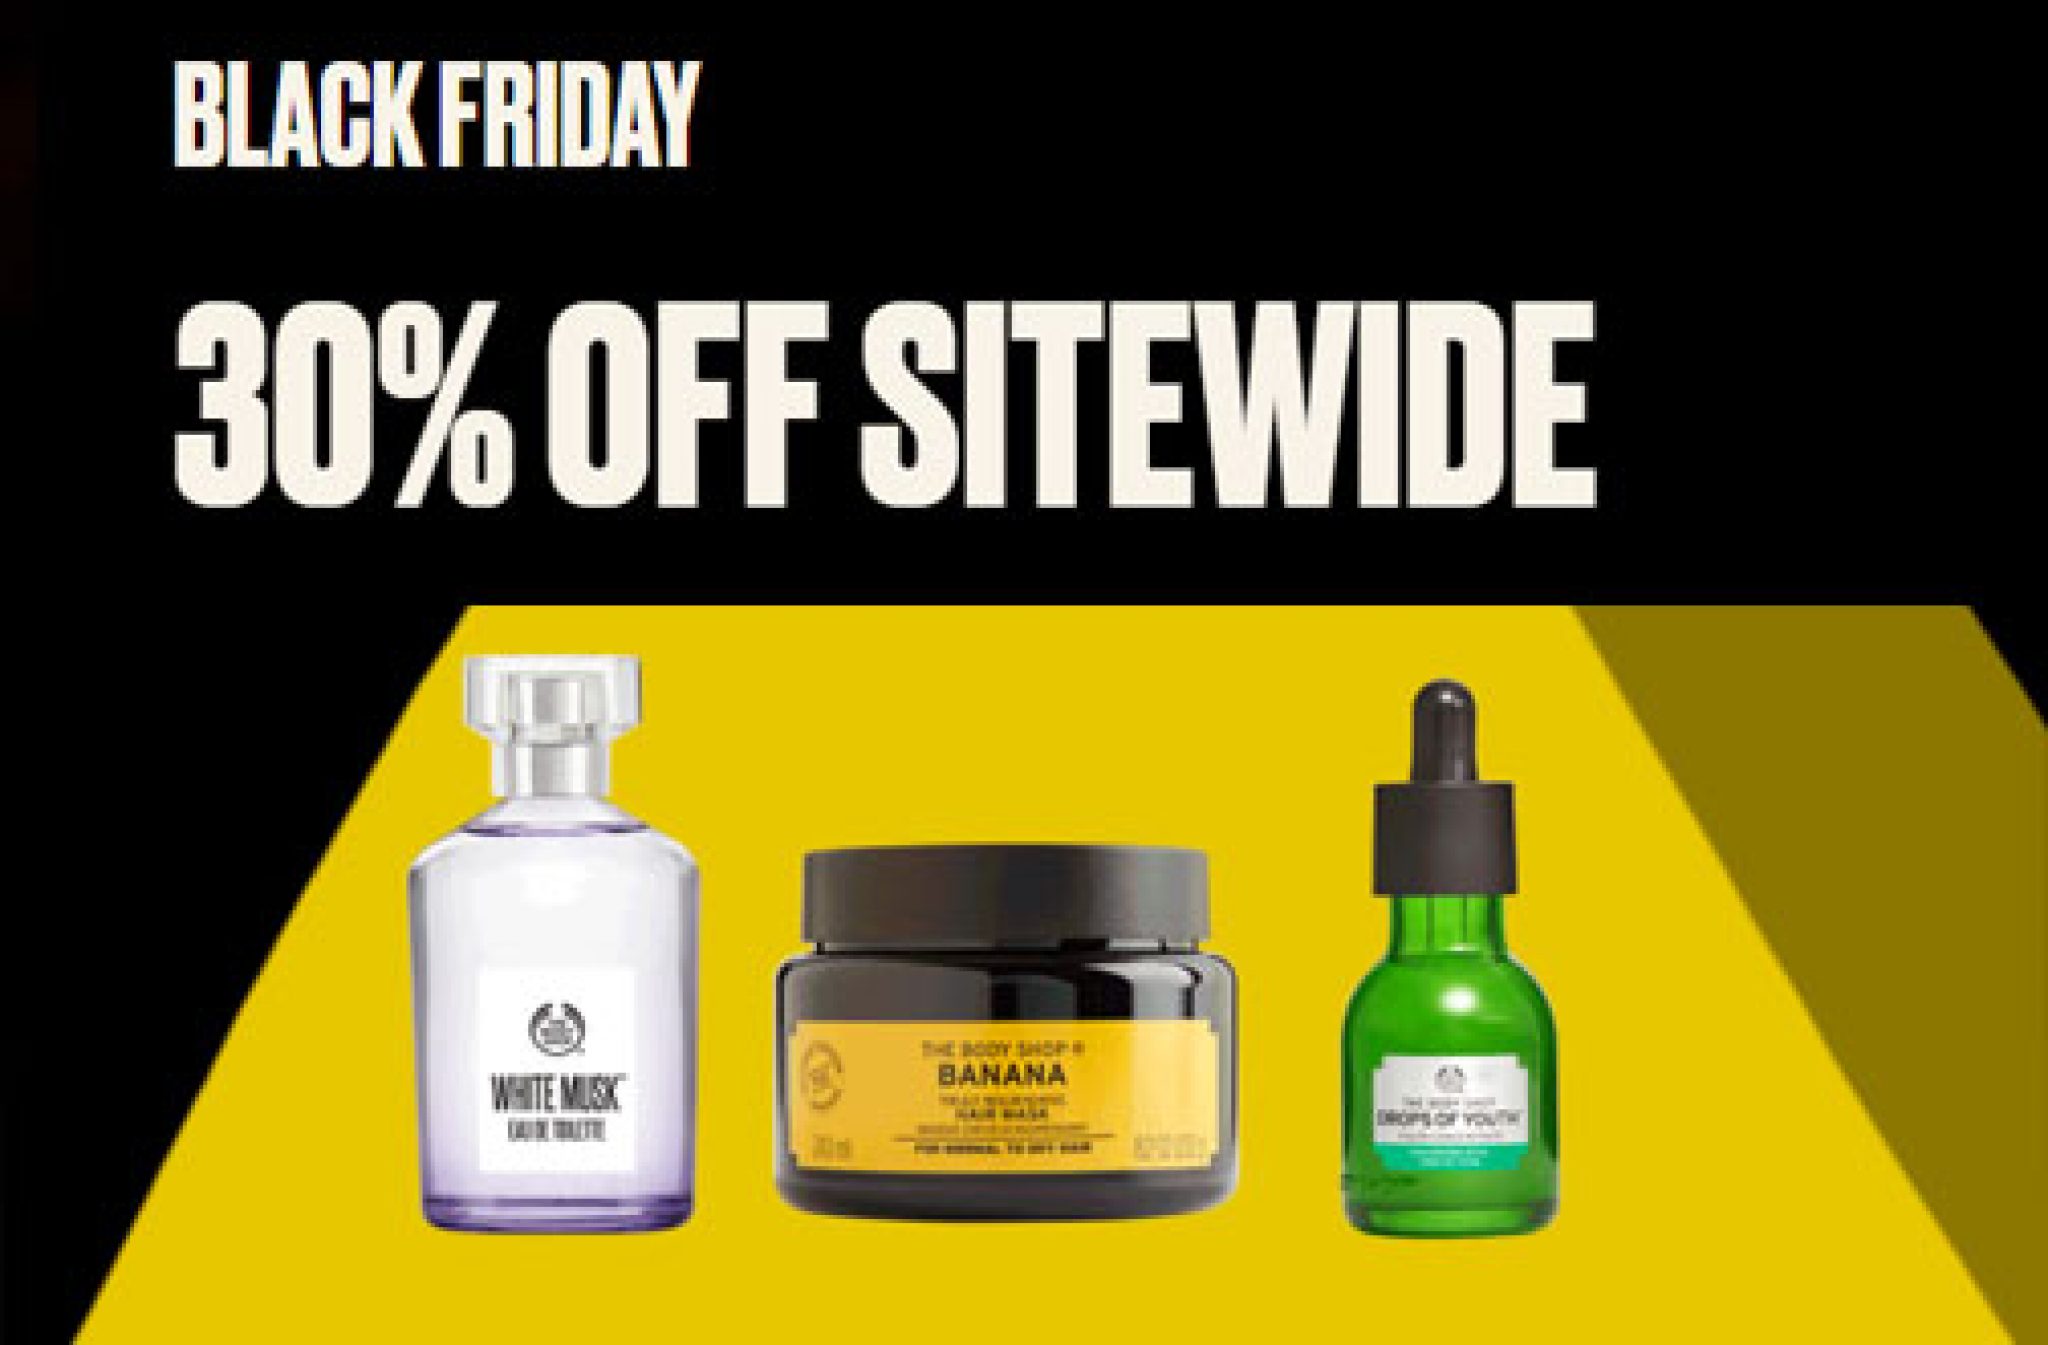 The Body Shop Black Friday — Deals from SaveaLoonie!